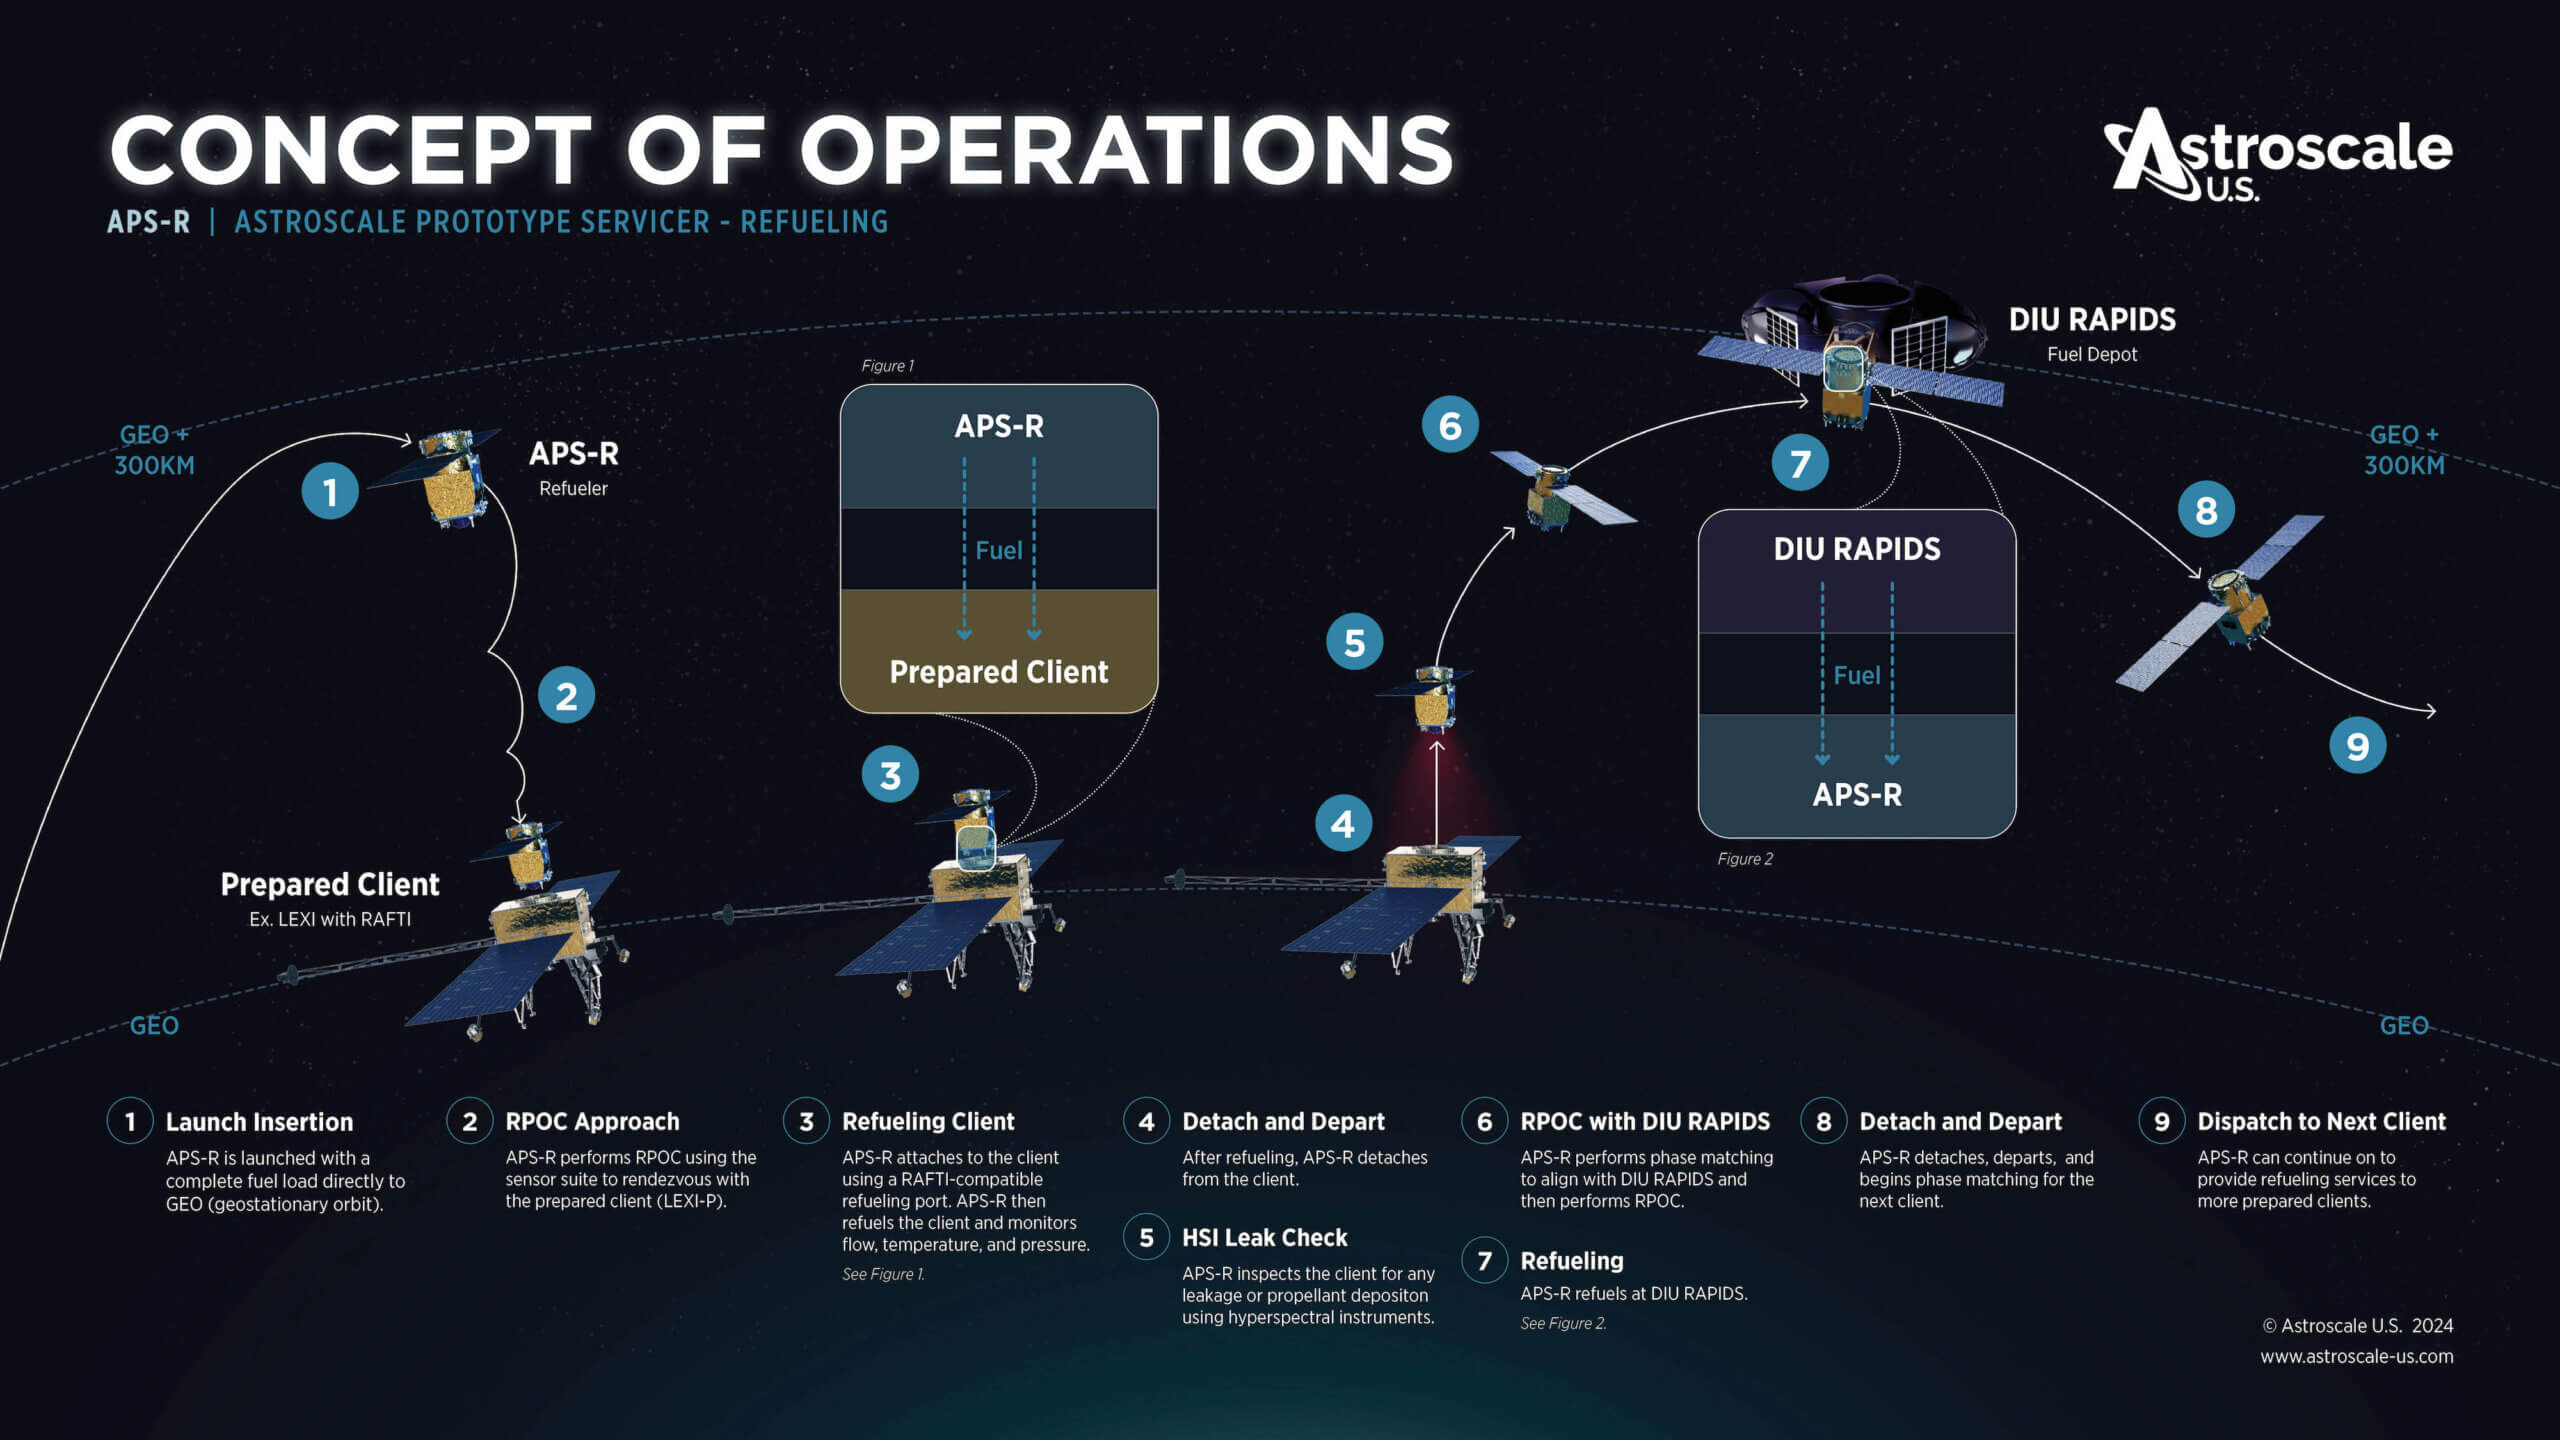 Refueling in space. Infographic courtesy of Astroscale